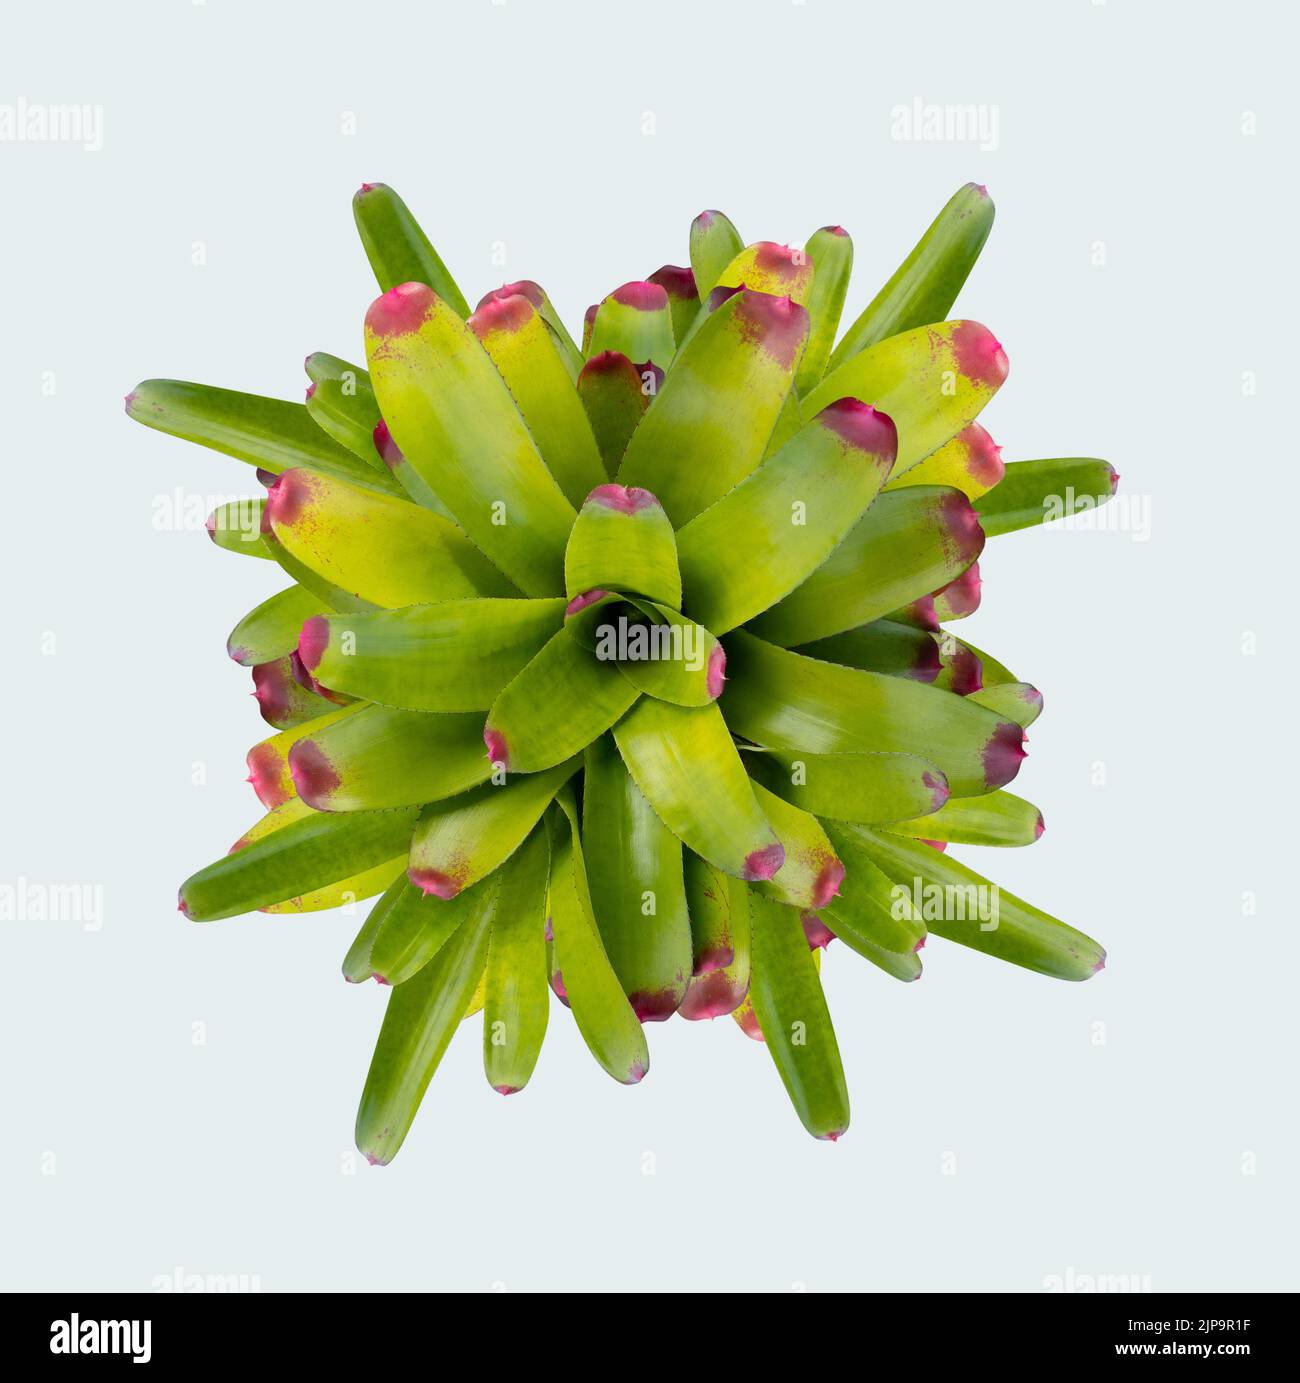 Bromeliads Neoregelia isolated on white background, Bromeliads Neoregelia Thai species with mostly green leaves. Stock Photo